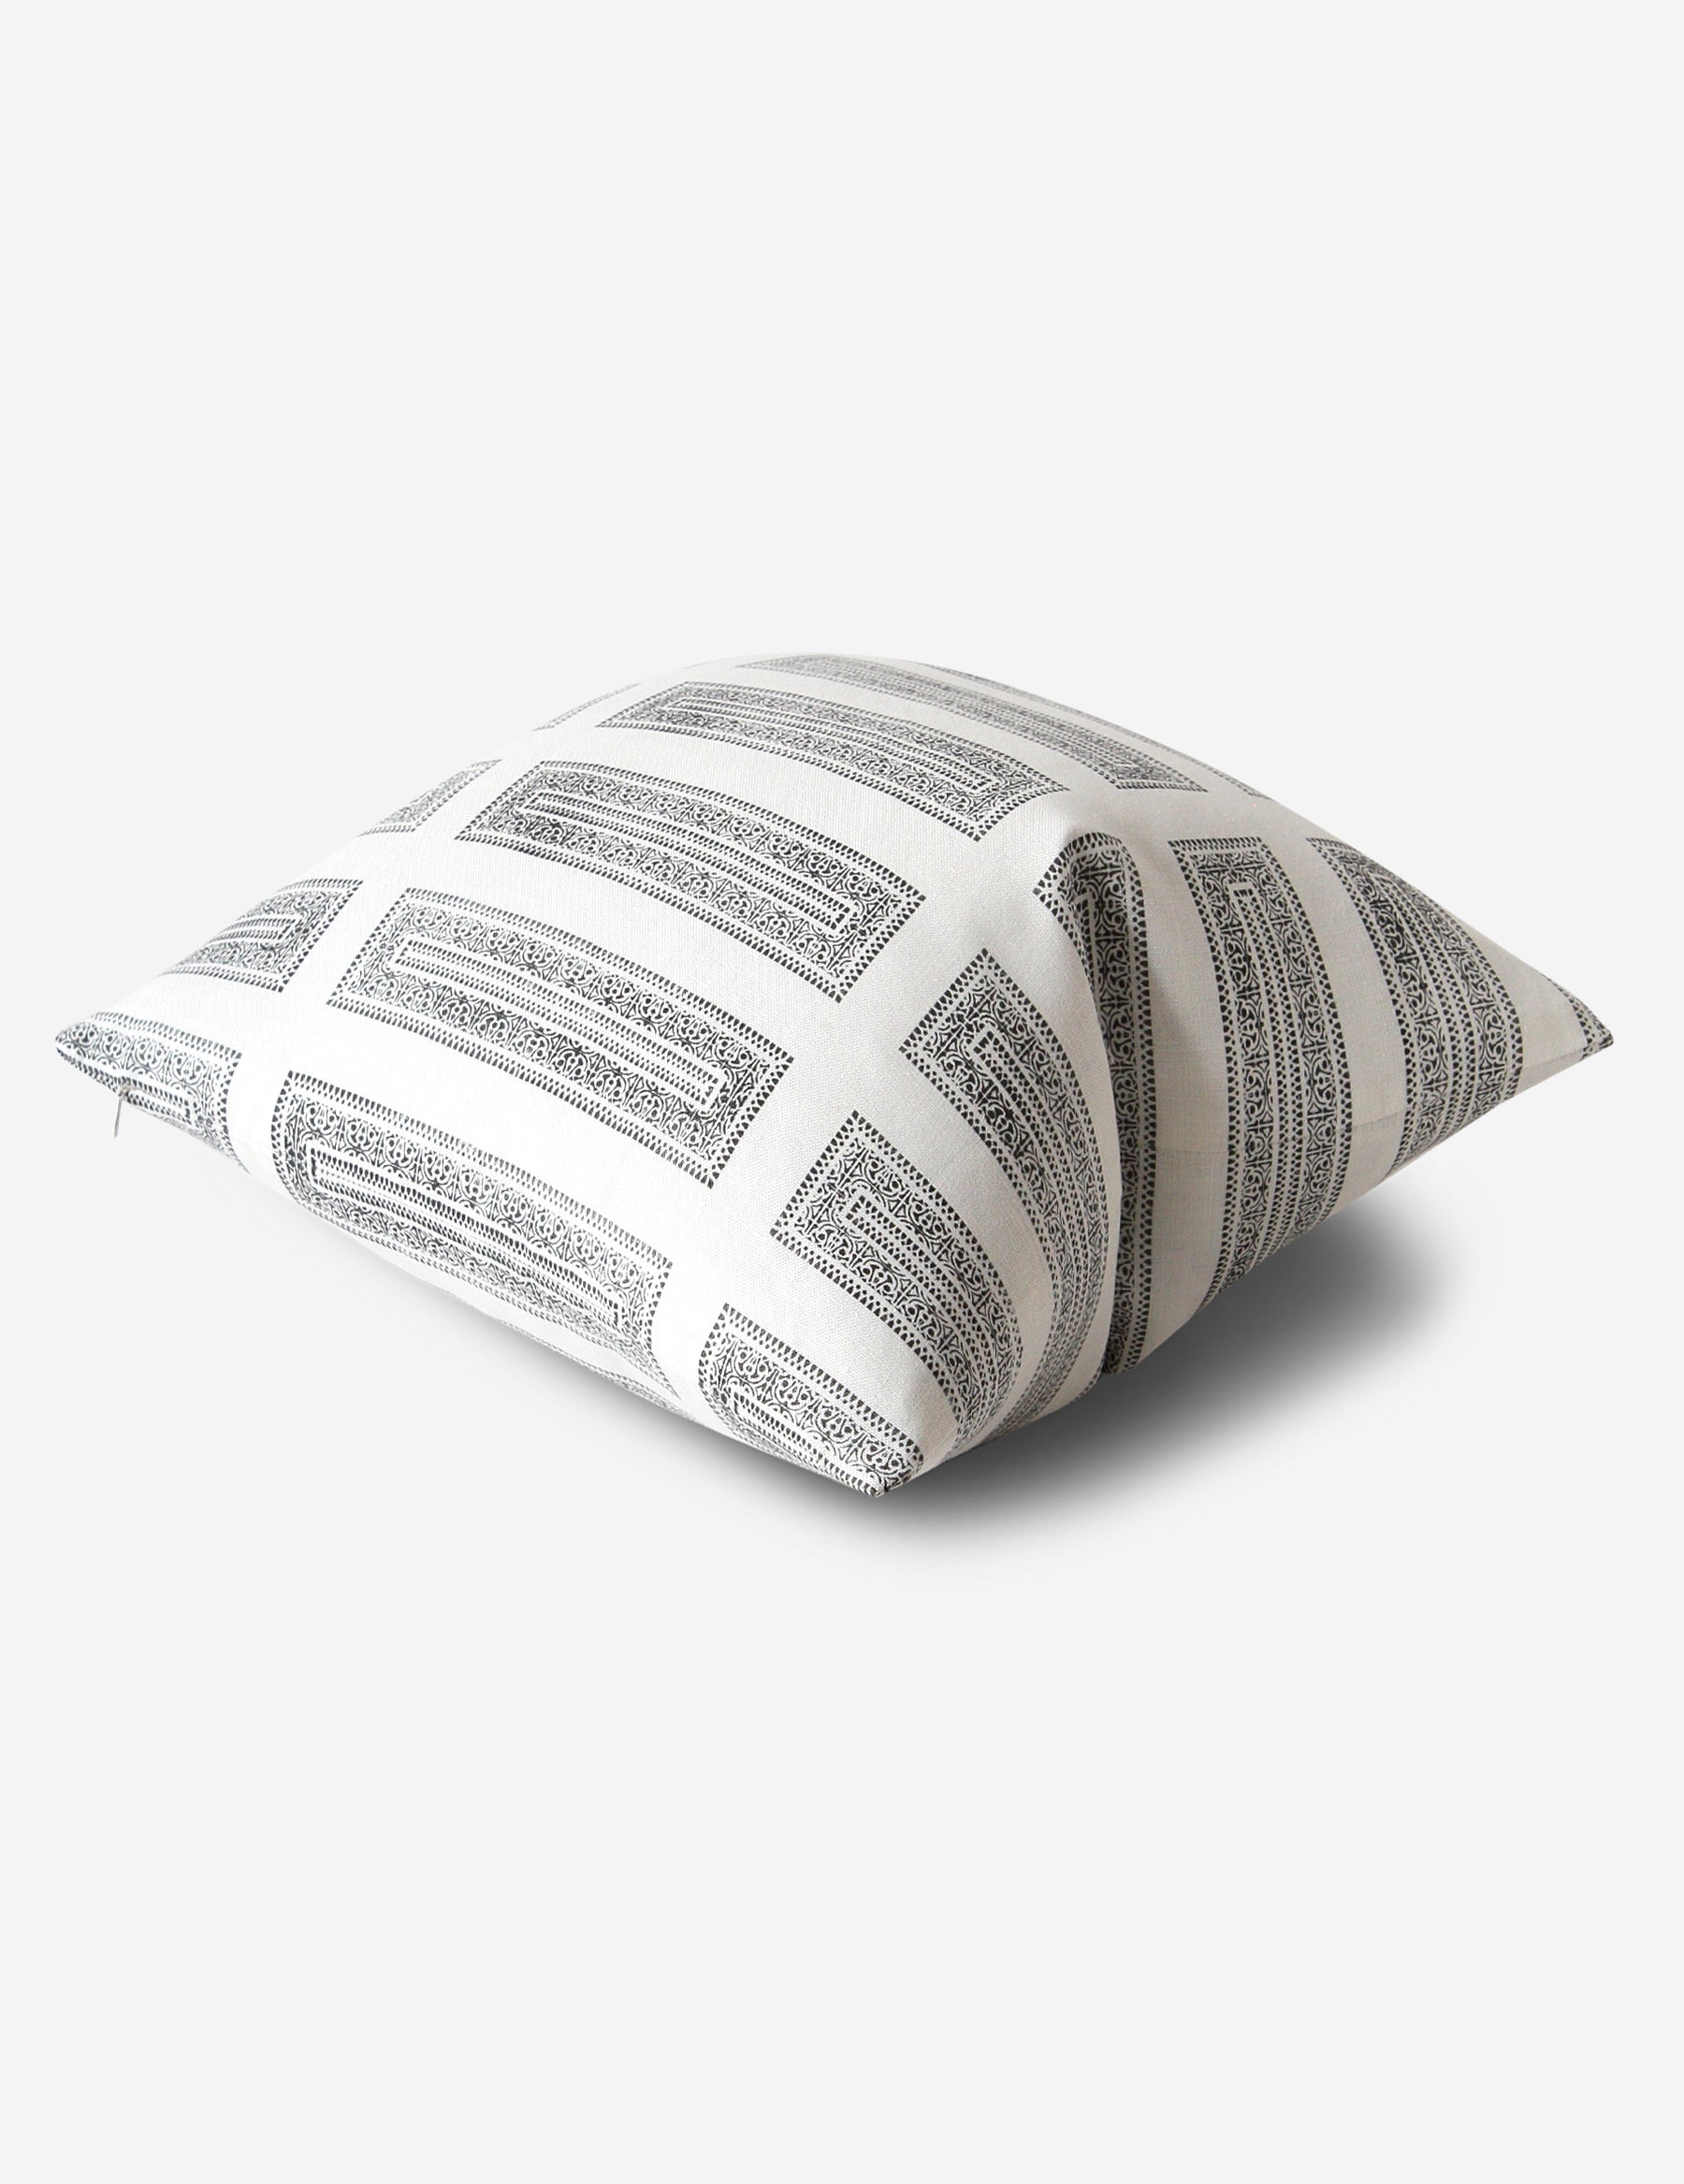 Temple Pillow / Kohl Oyster